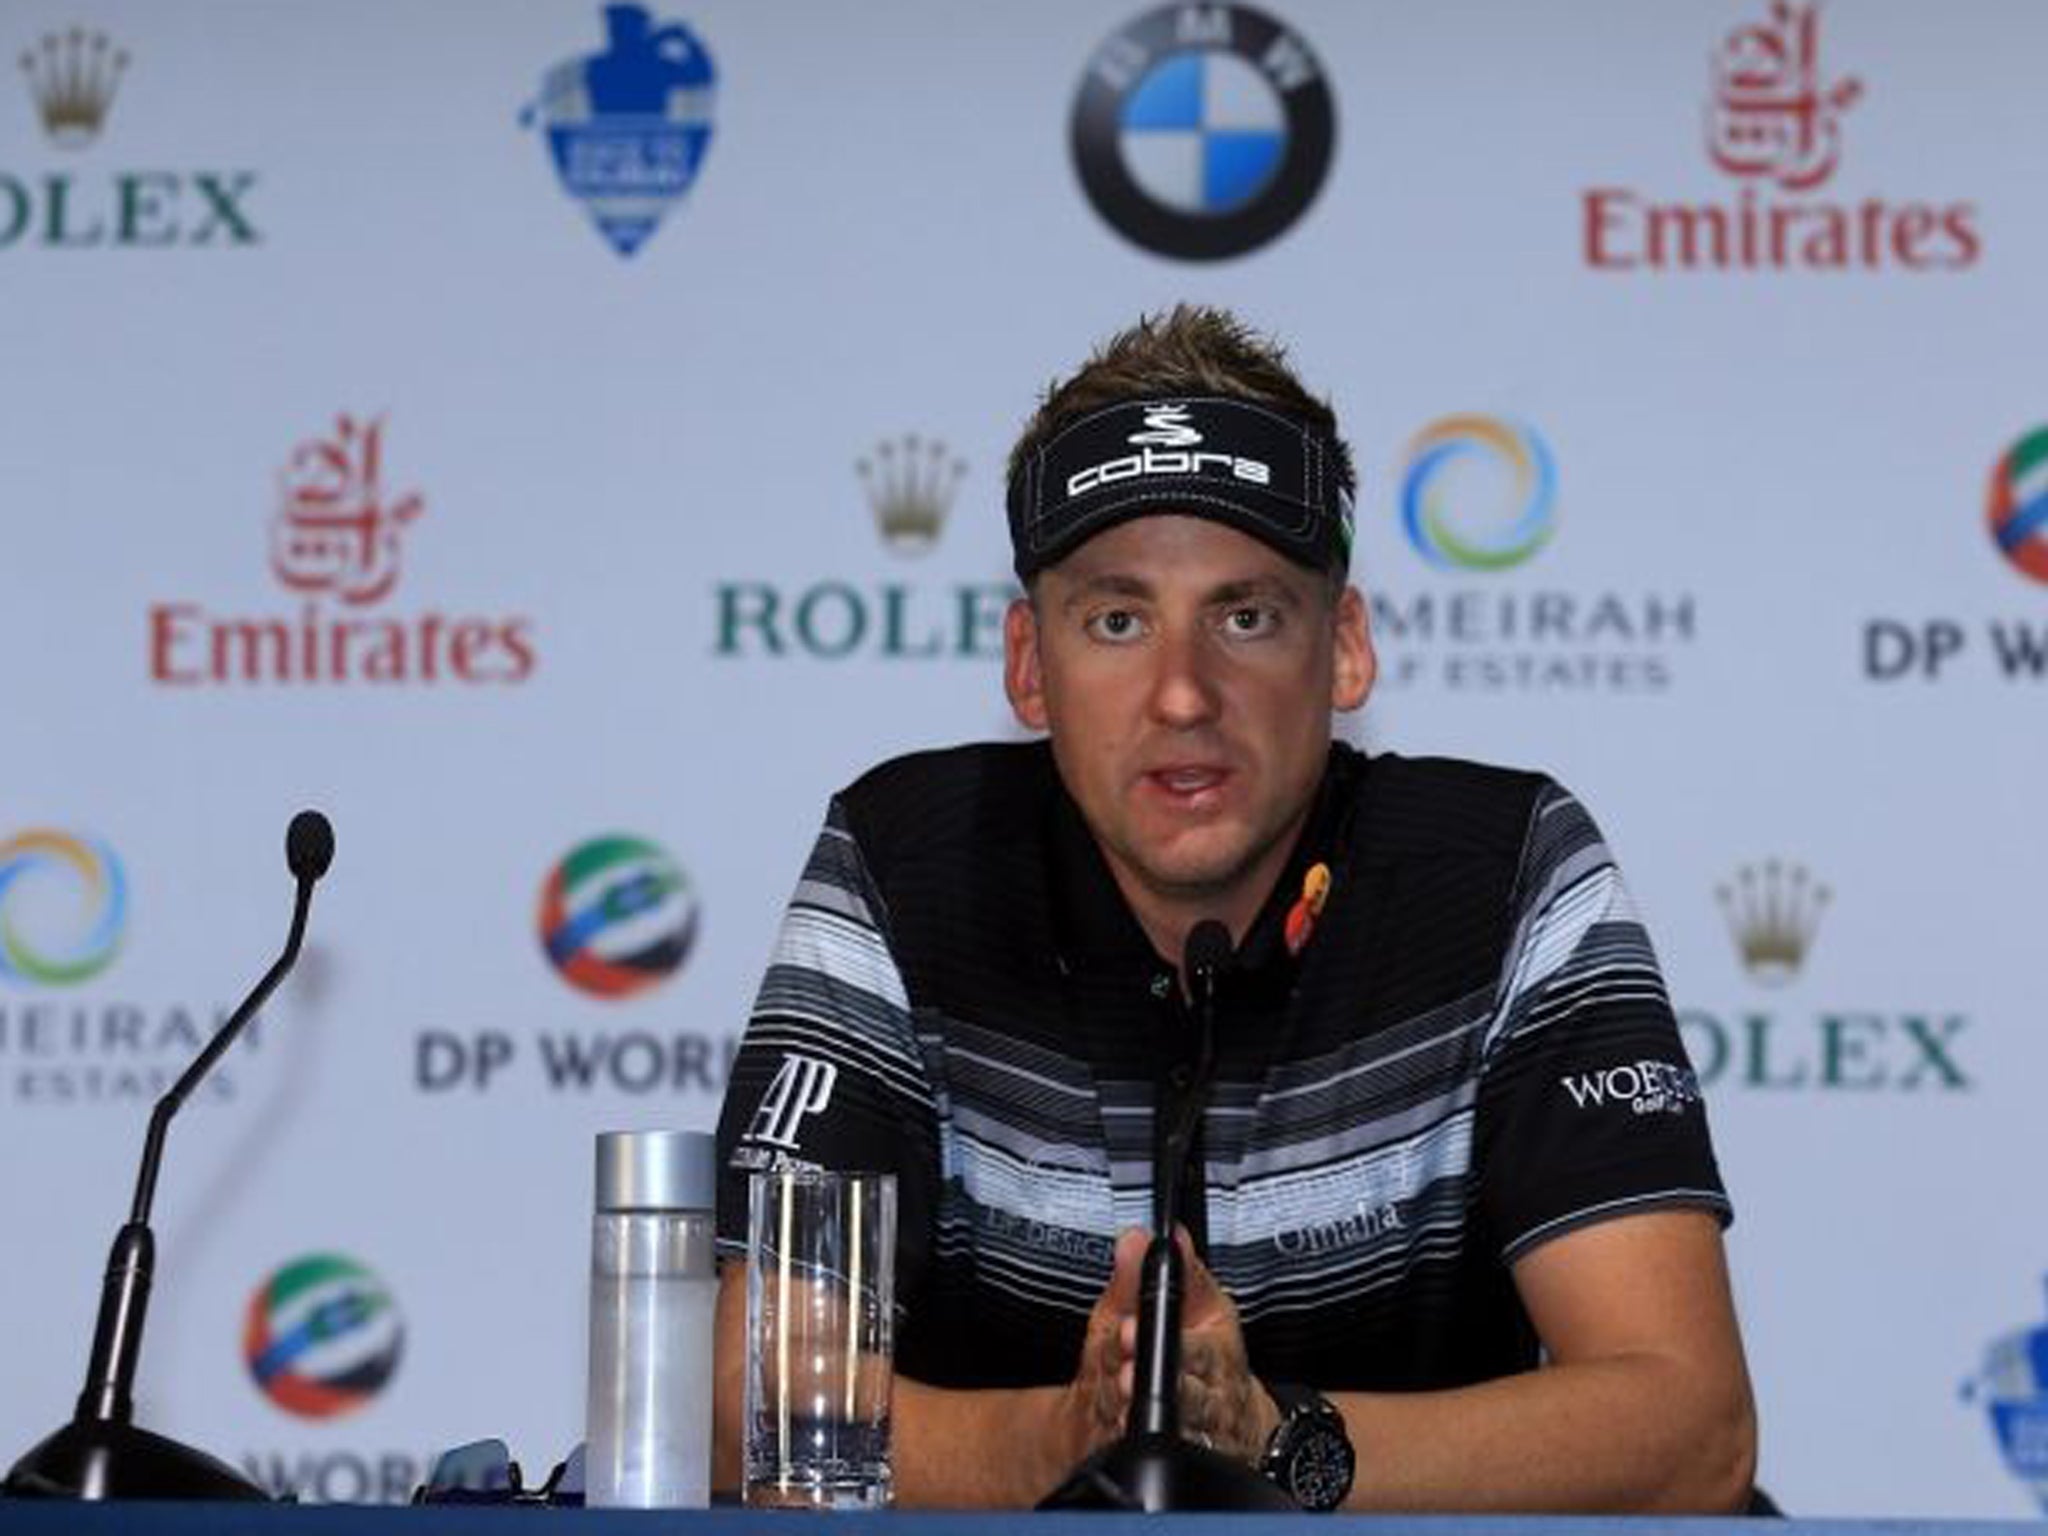 Ian Poulter was full of beans in Dubai